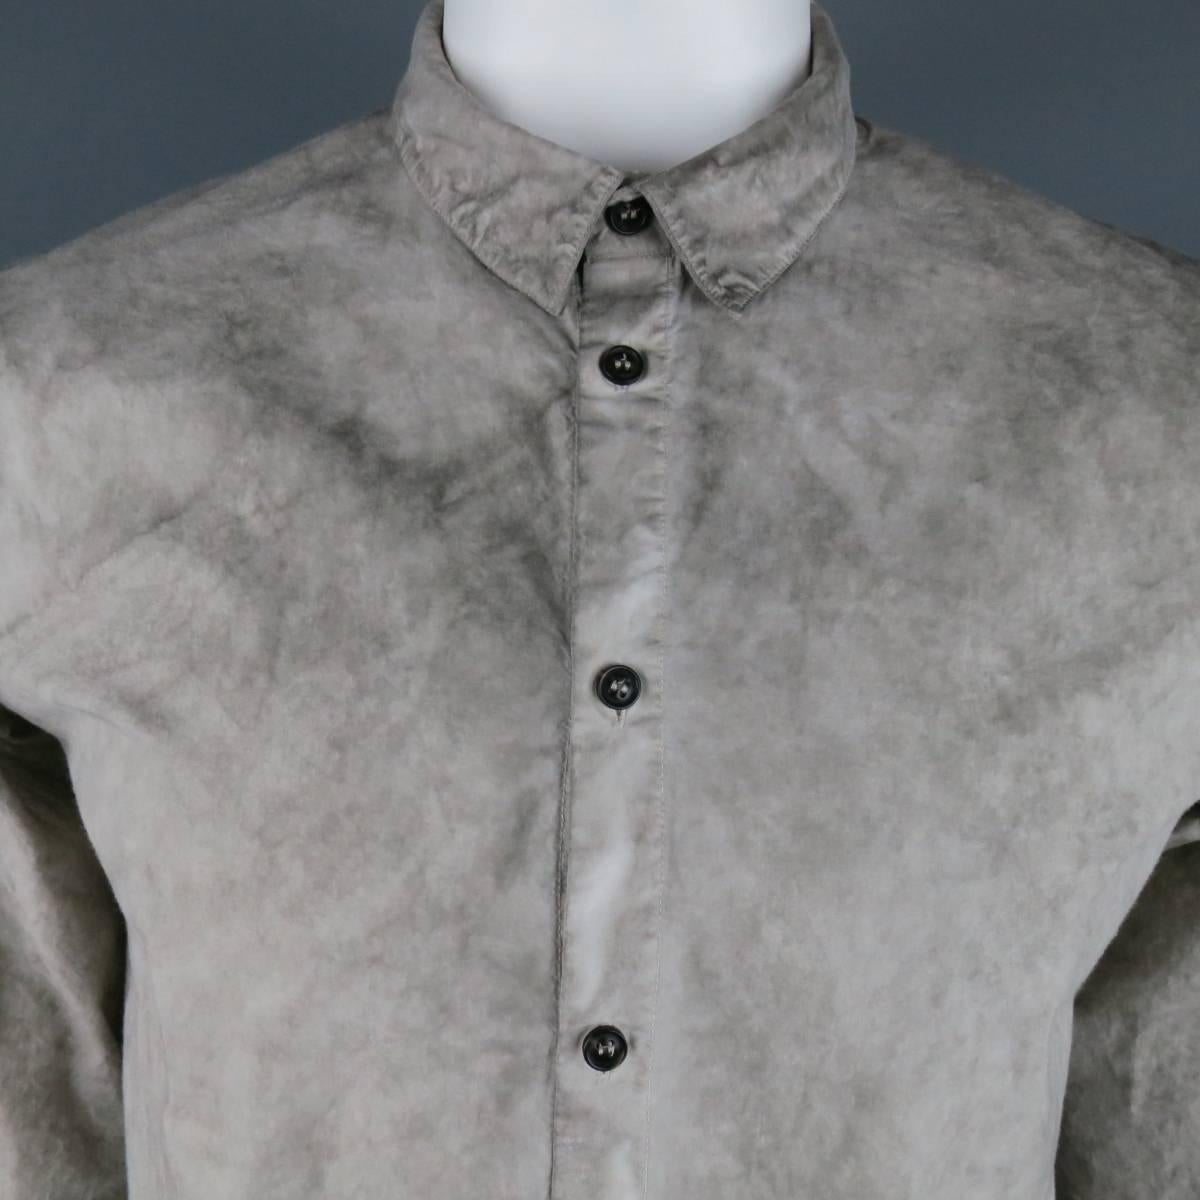 SILENT by DAMIR DOMA button up shirt in a gray marble dyed cotton bend with a pointed collar and all over distressing details. Made in Romania.
 
Excellent Pre-Owned Condition.
Marked: L
 
Measurements:
 
Shoulder: 18 in.
Chest: 44 in.
Sleeve: 27.5